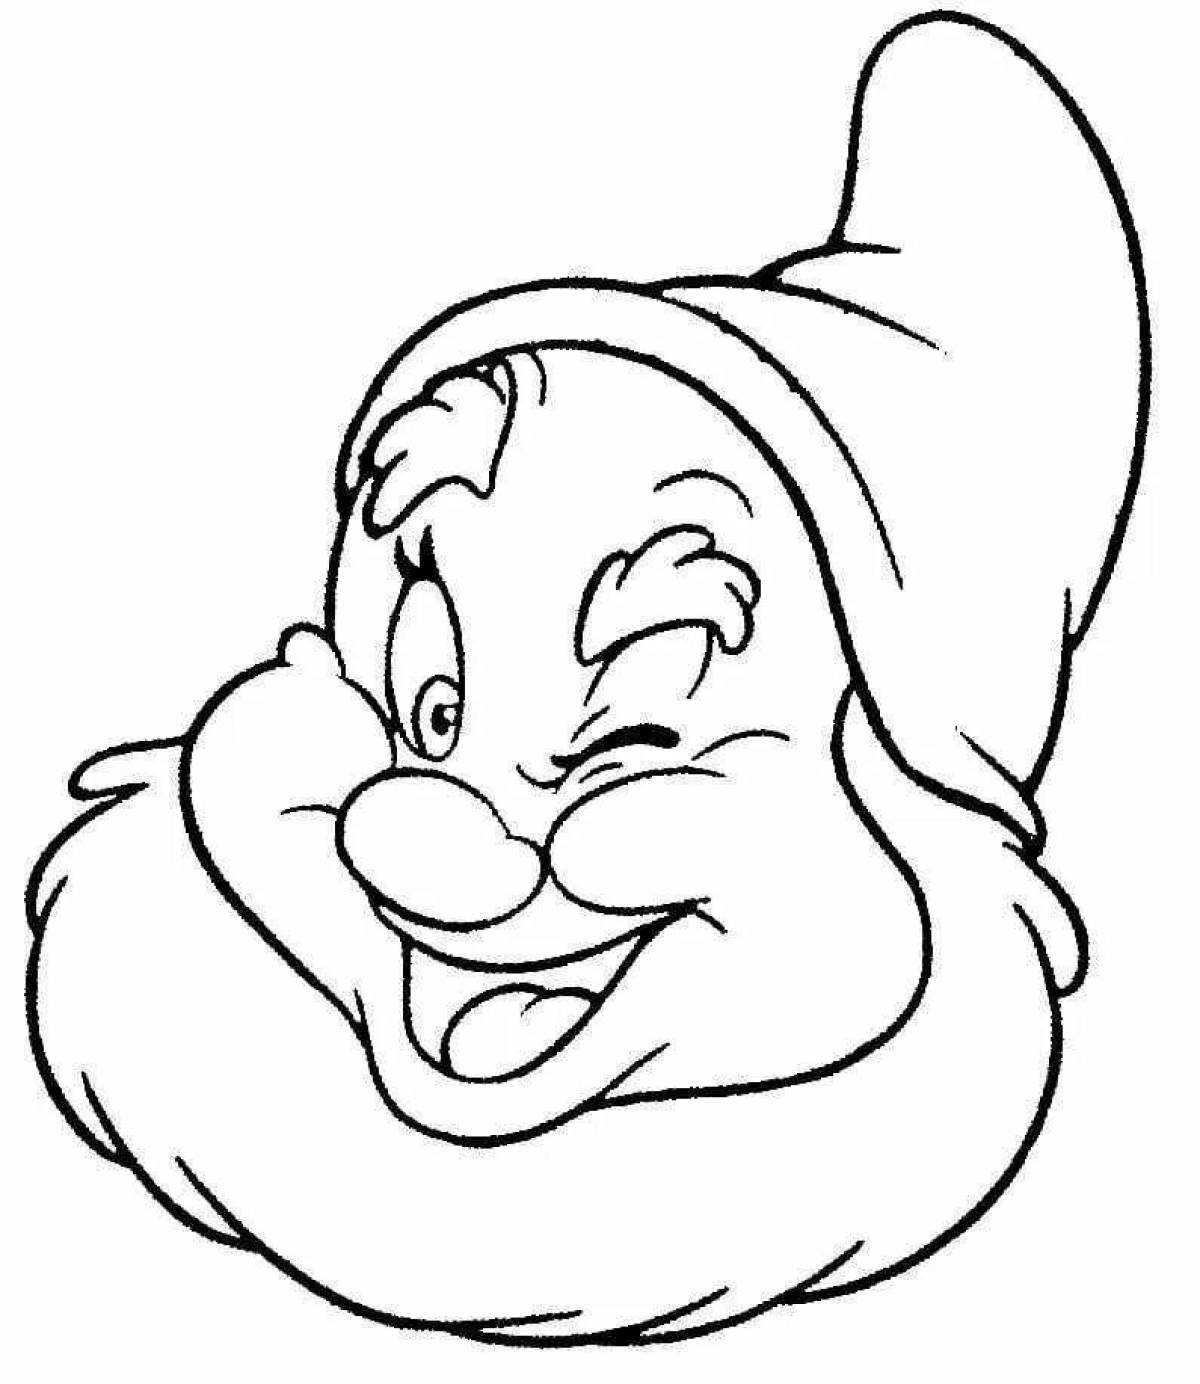 Amazing gnome coloring book for kids